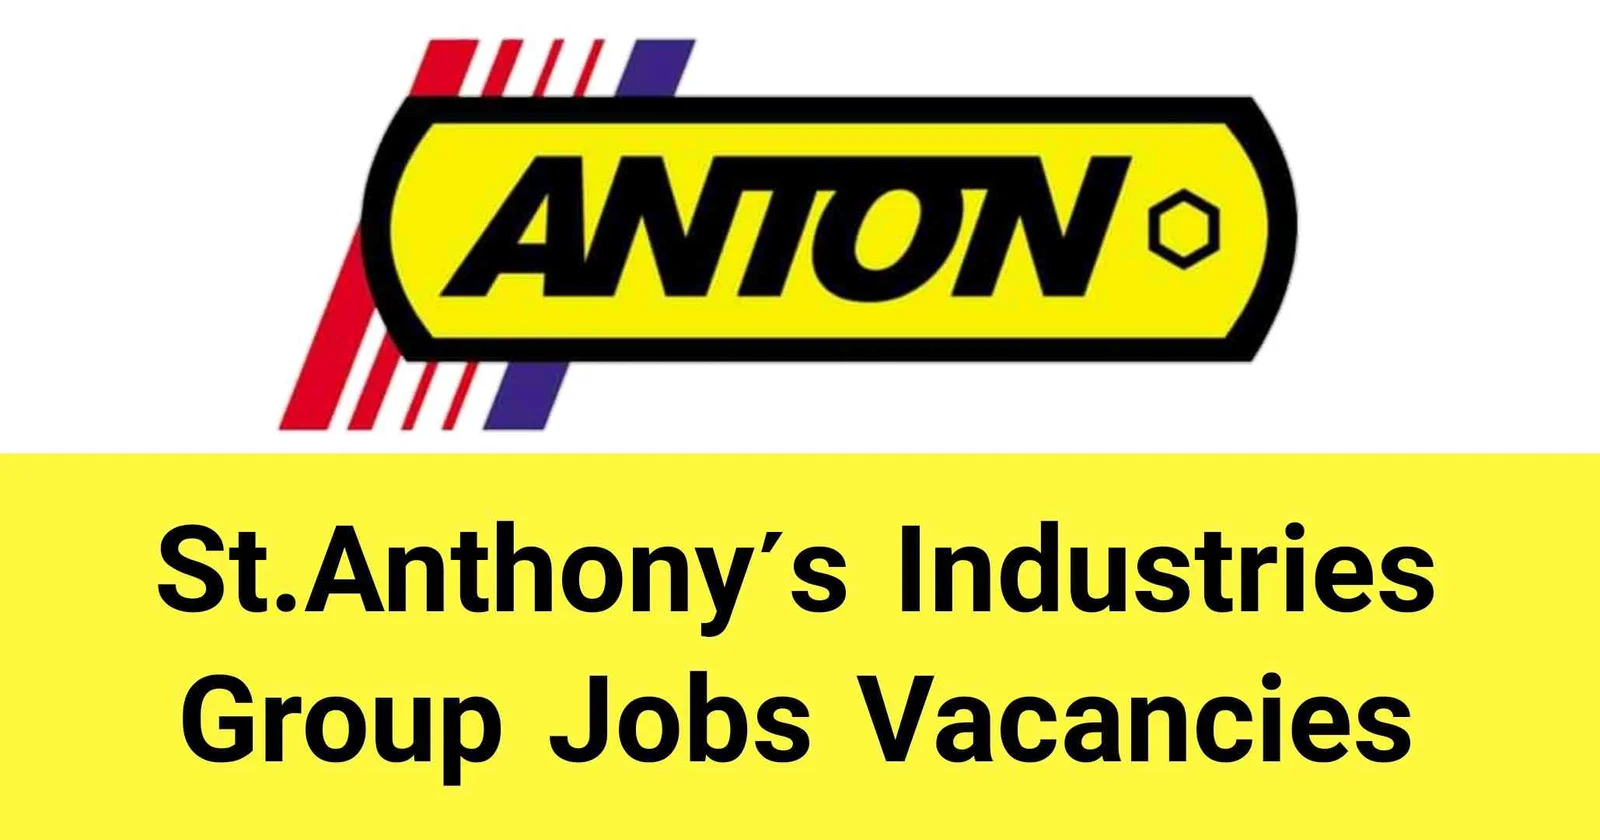 St.Anthony's Industries Group Jobs Vacancies